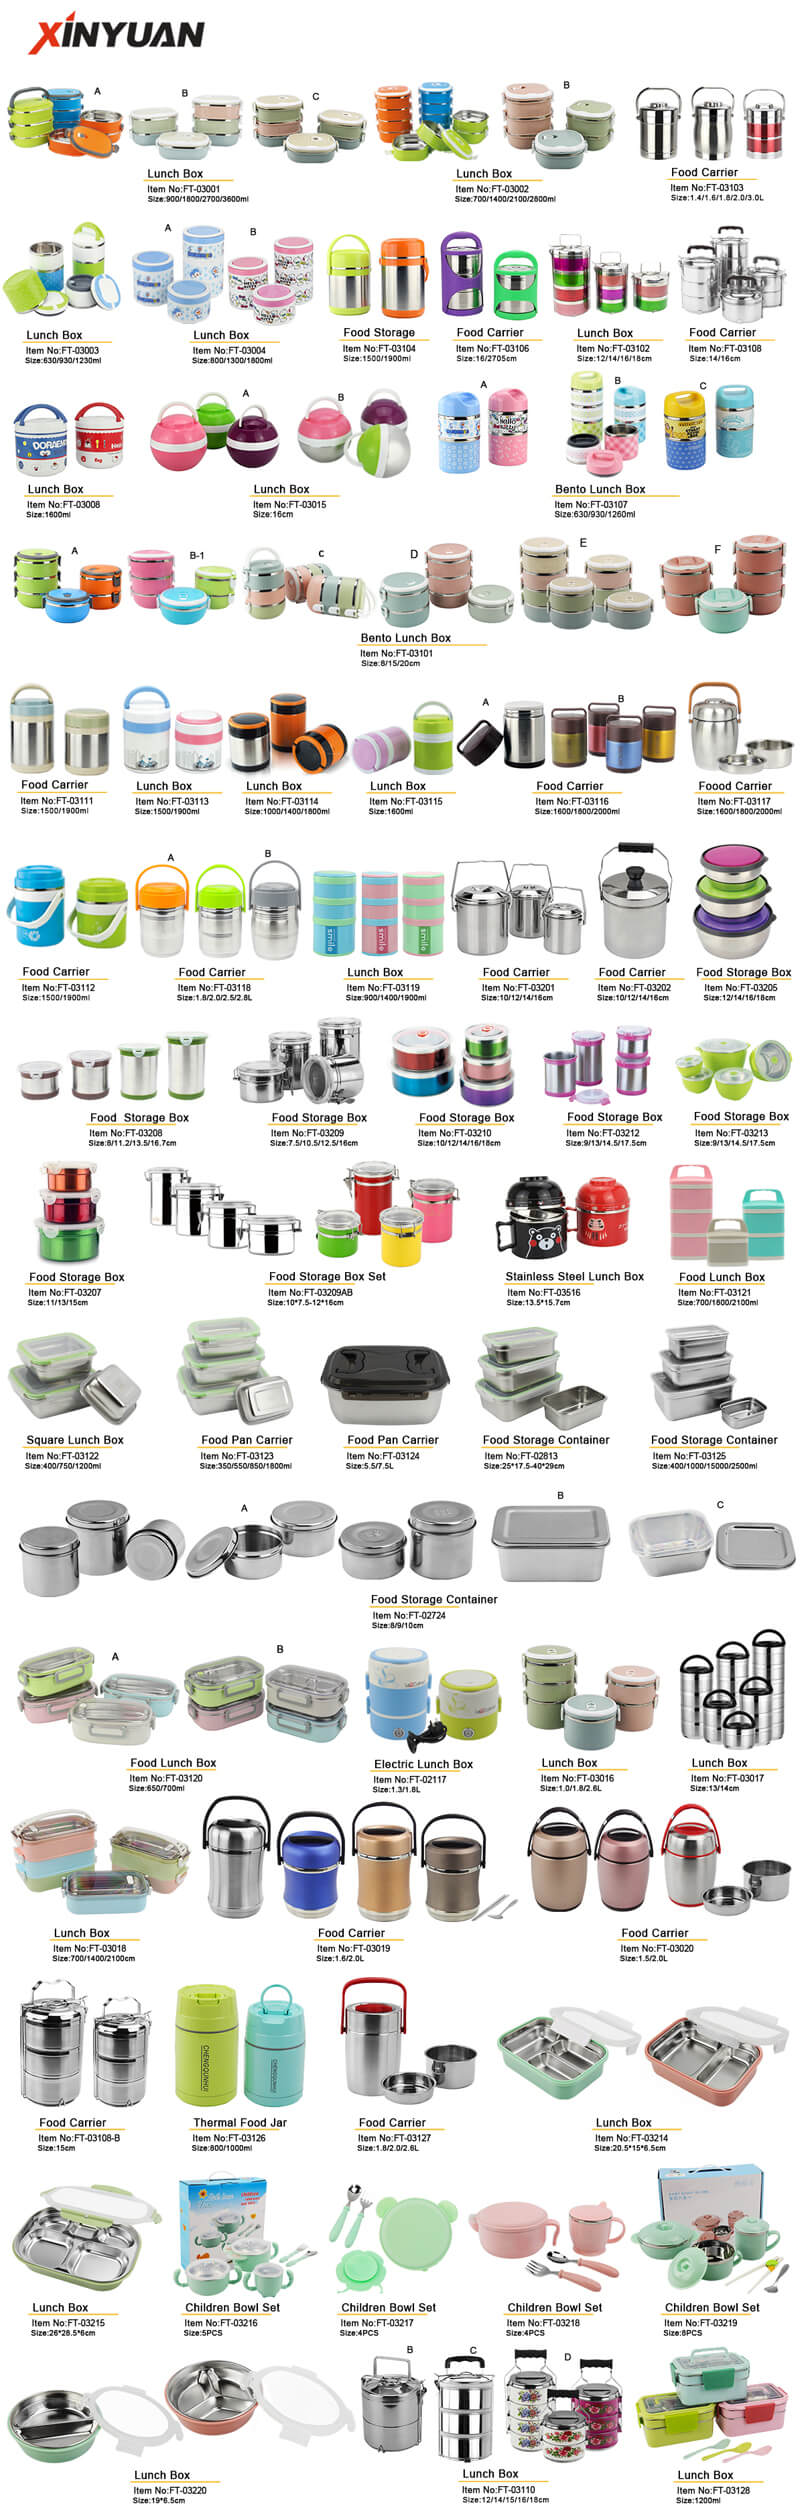 lunch box Product Catalog stainless steel